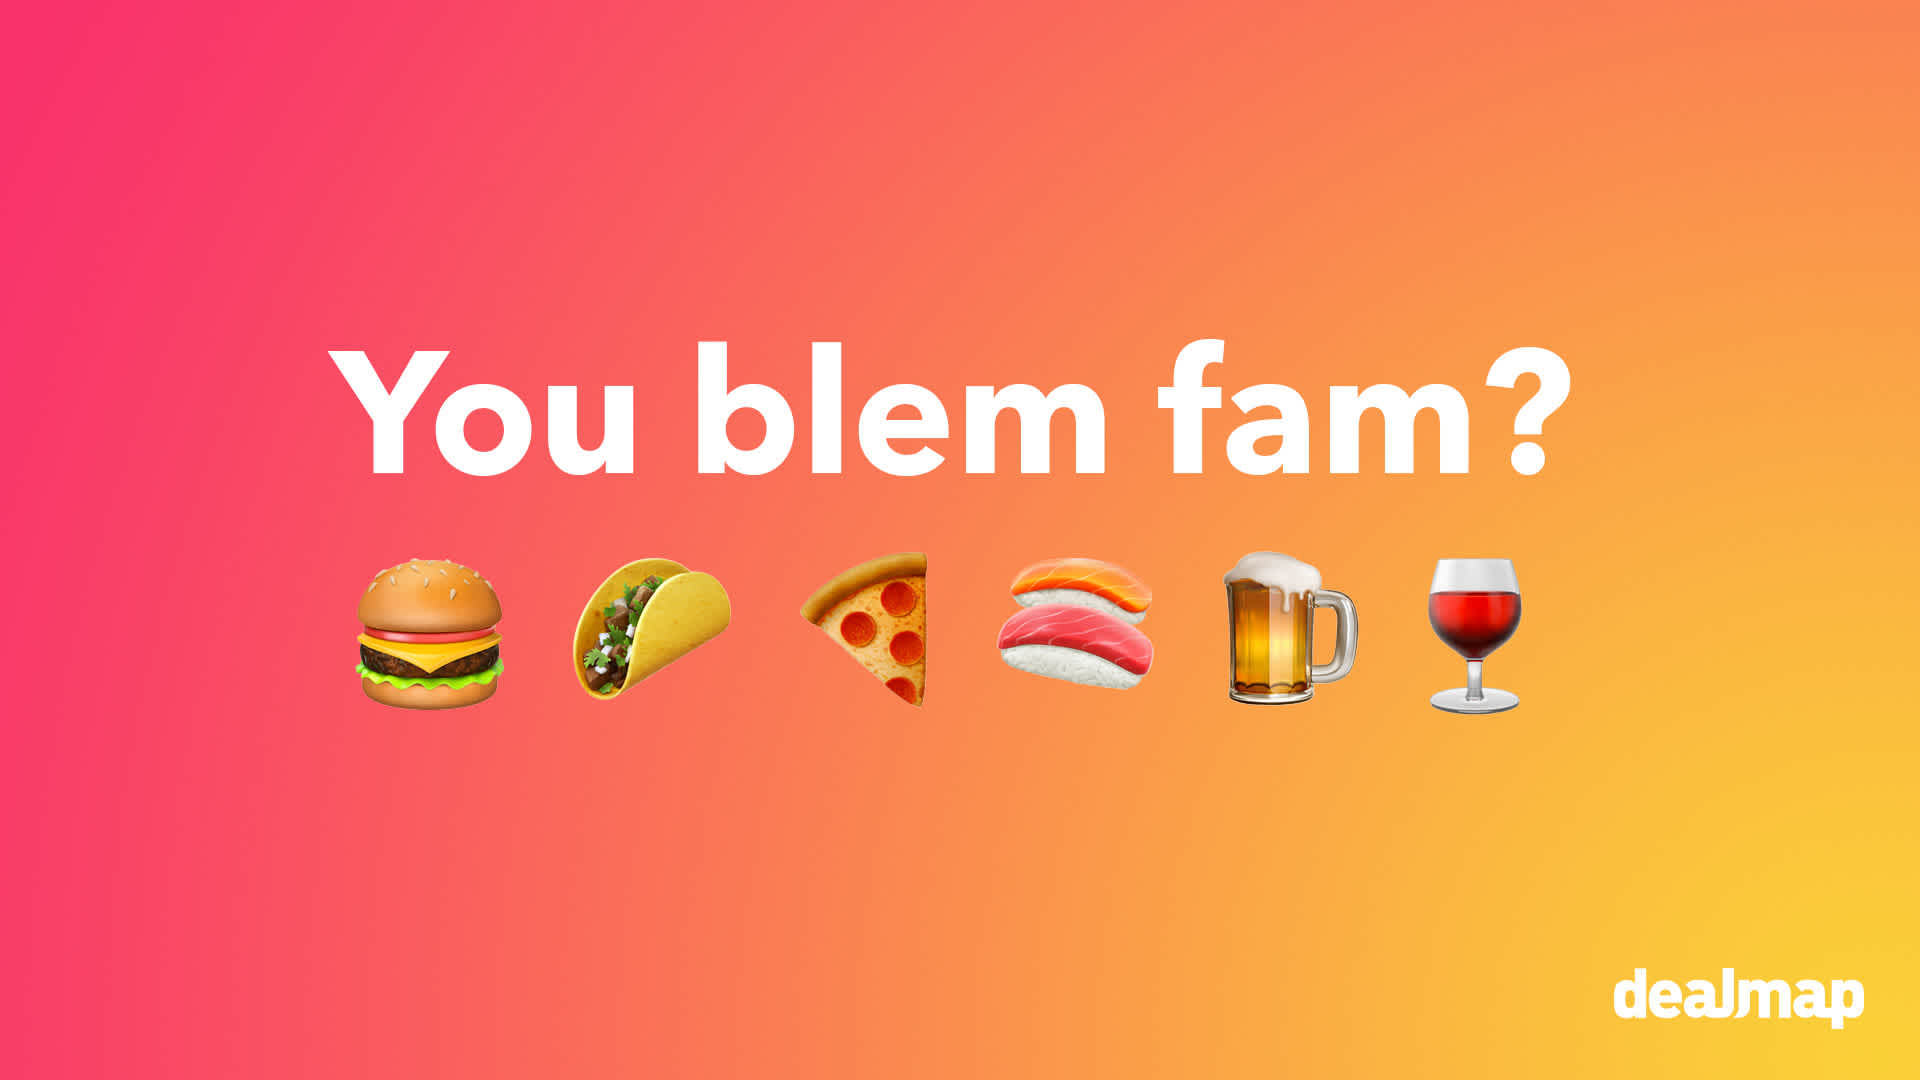 Text that displays 'You blem fam' and food emojis